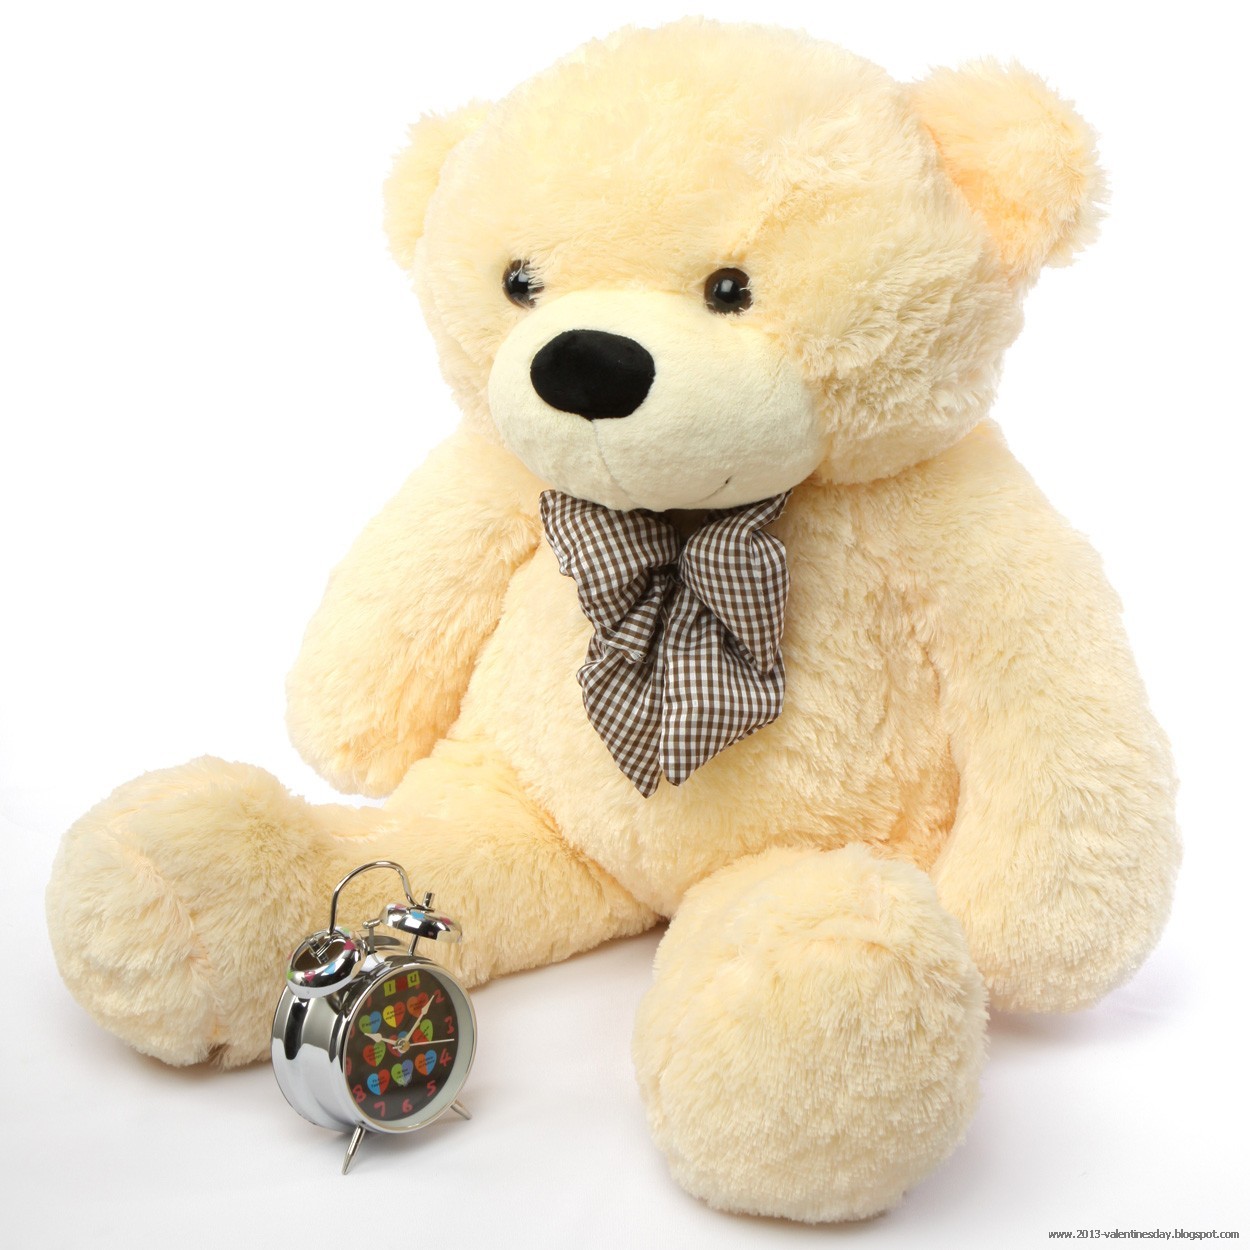 Valentines day Teddy bear gift ideas n HD wallpapers | I Love You ...